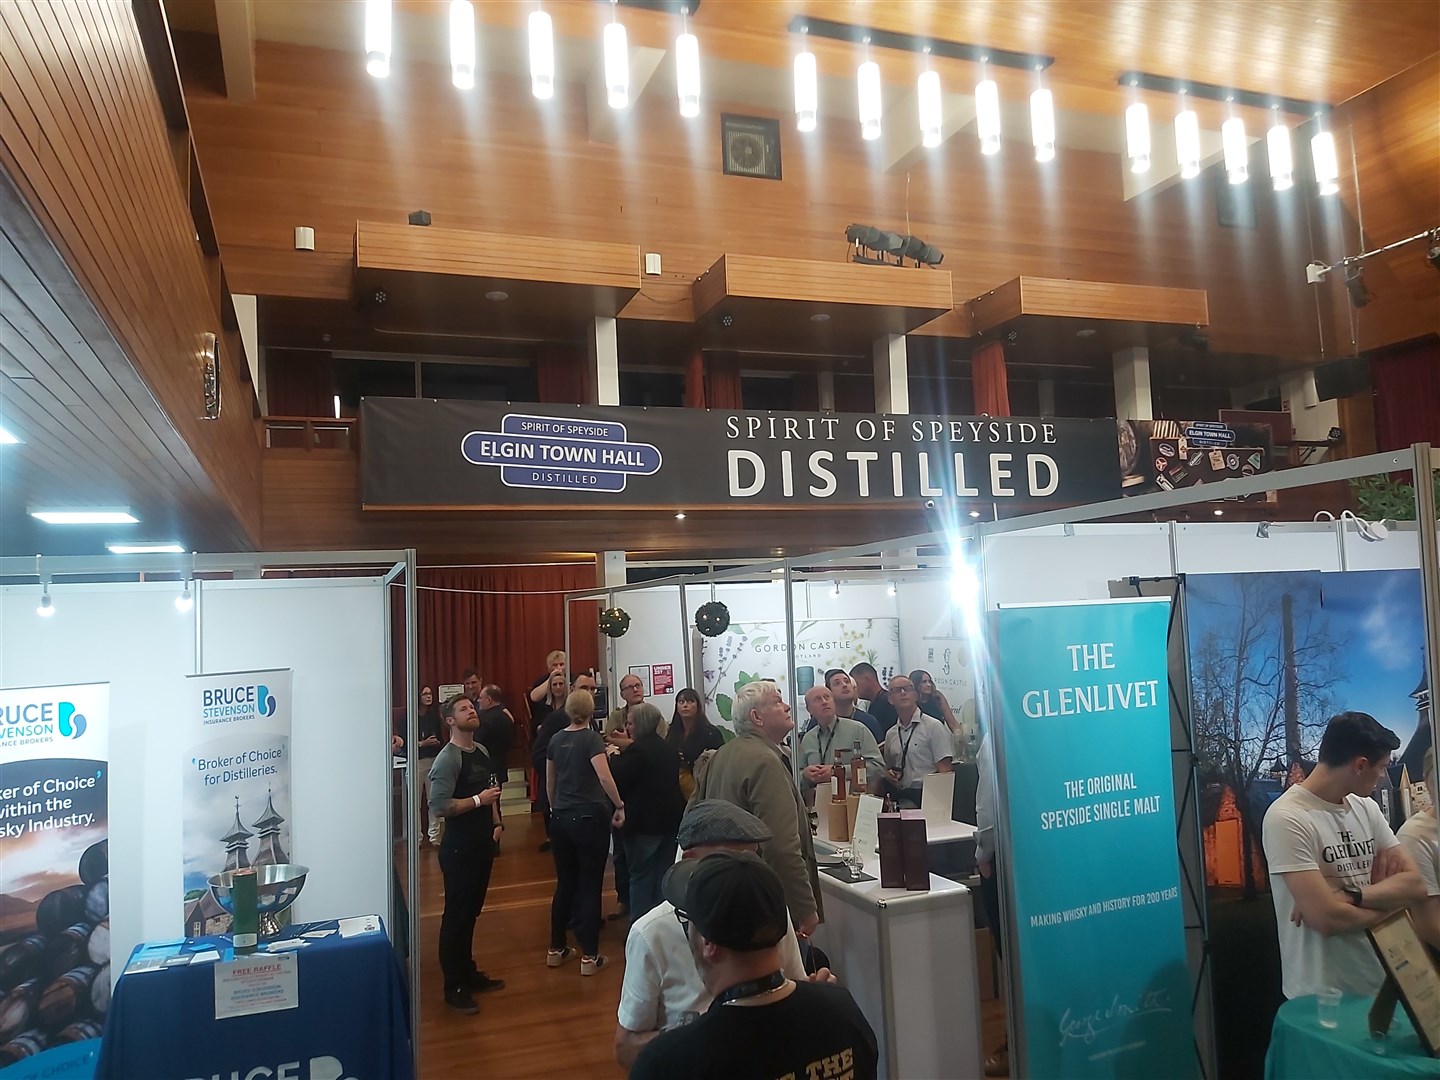 Elgin Town Hall was busy for the opening session of Speyside Distilled 2022.